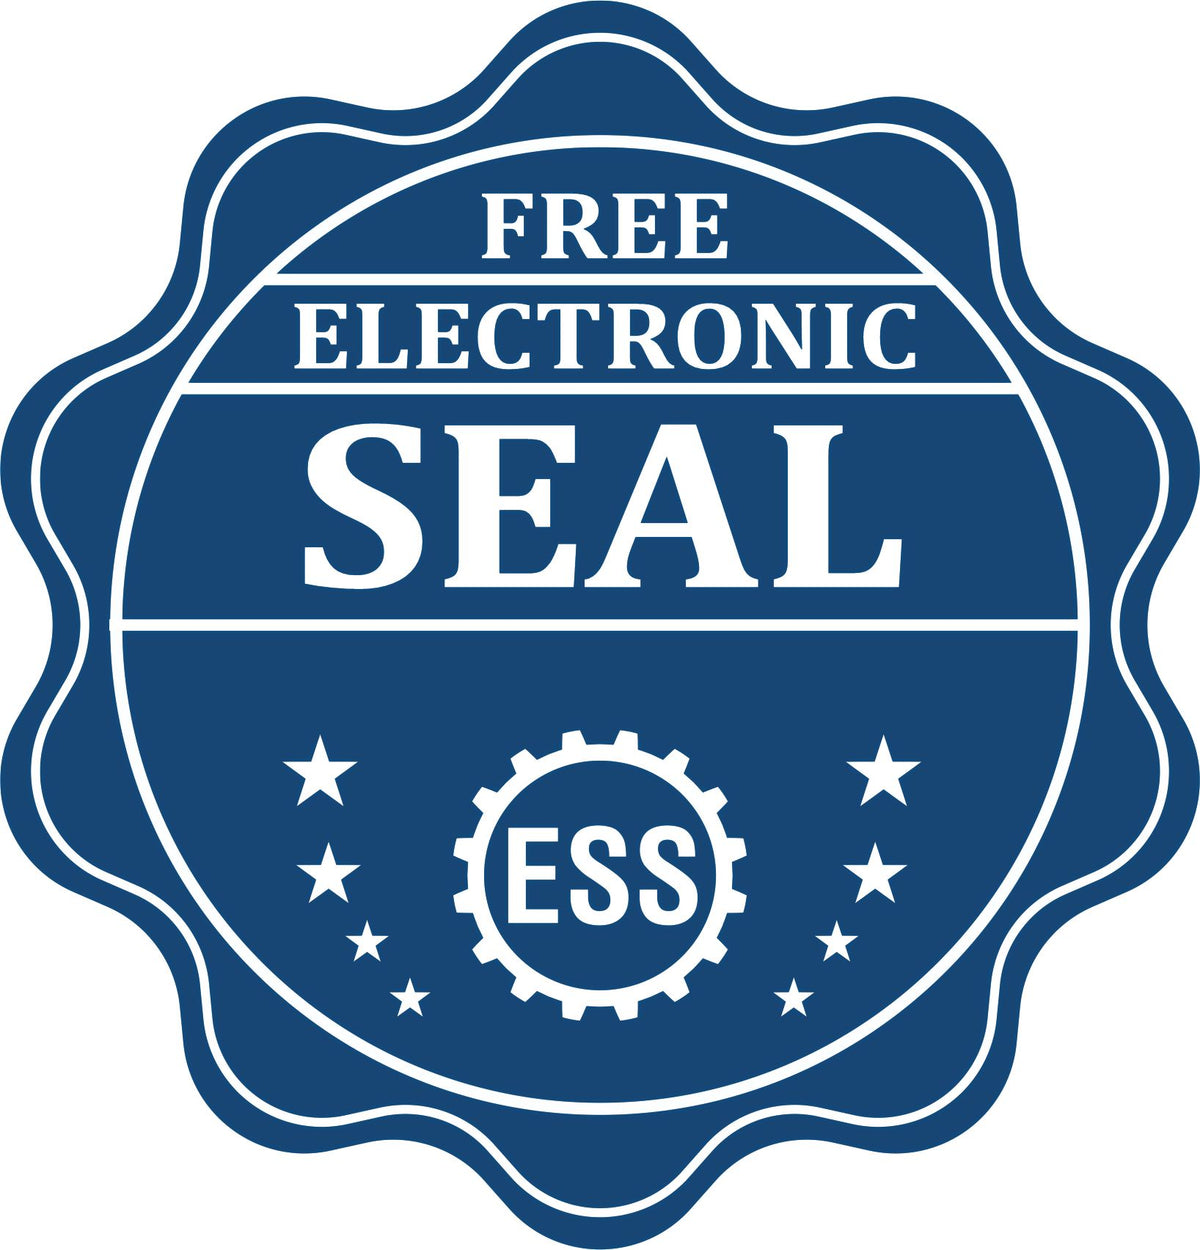 A badge showing a free electronic seal for the State of Wisconsin Extended Long Reach Geologist Seal with stars and the ESS gear on the emblem.